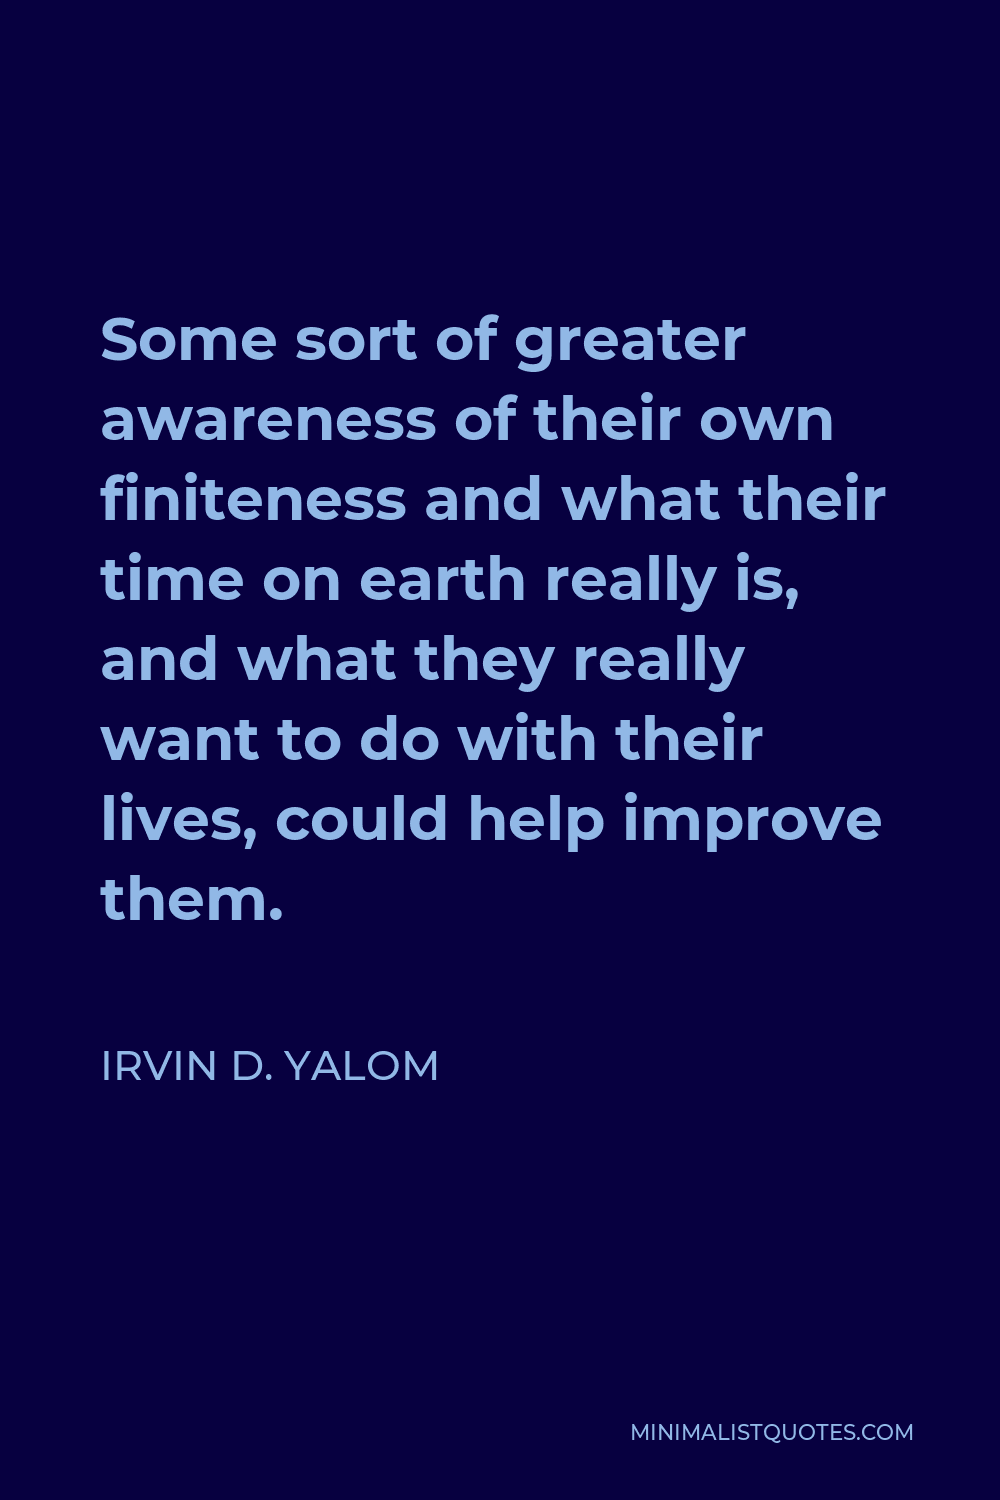 Irvin D. Yalom Quote - Some sort of greater awareness of their own finiteness and what their time on earth really is, and what they really want to do with their lives, could help improve them.